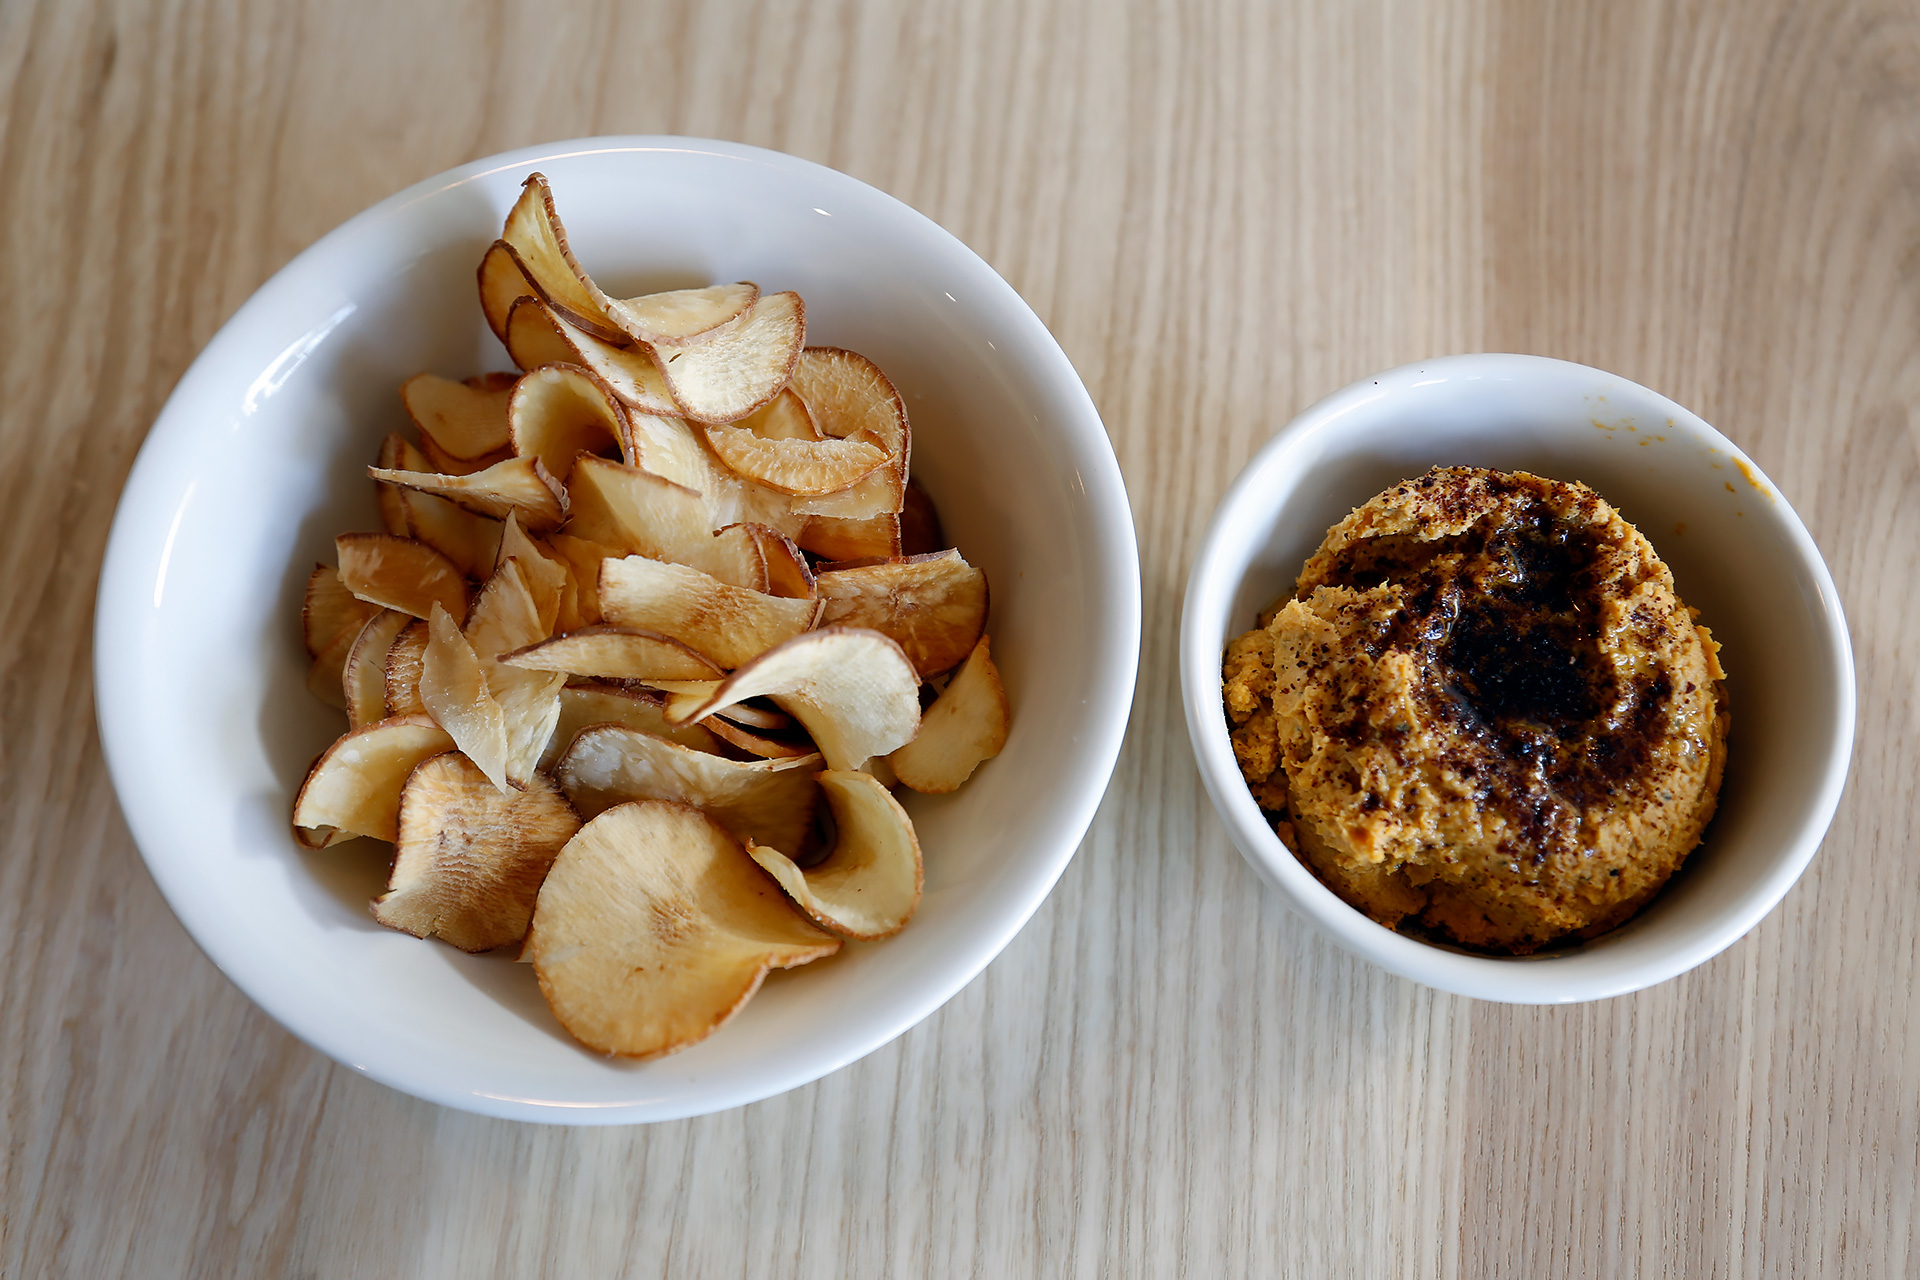 Butternut squash hummus and yucca chips. 